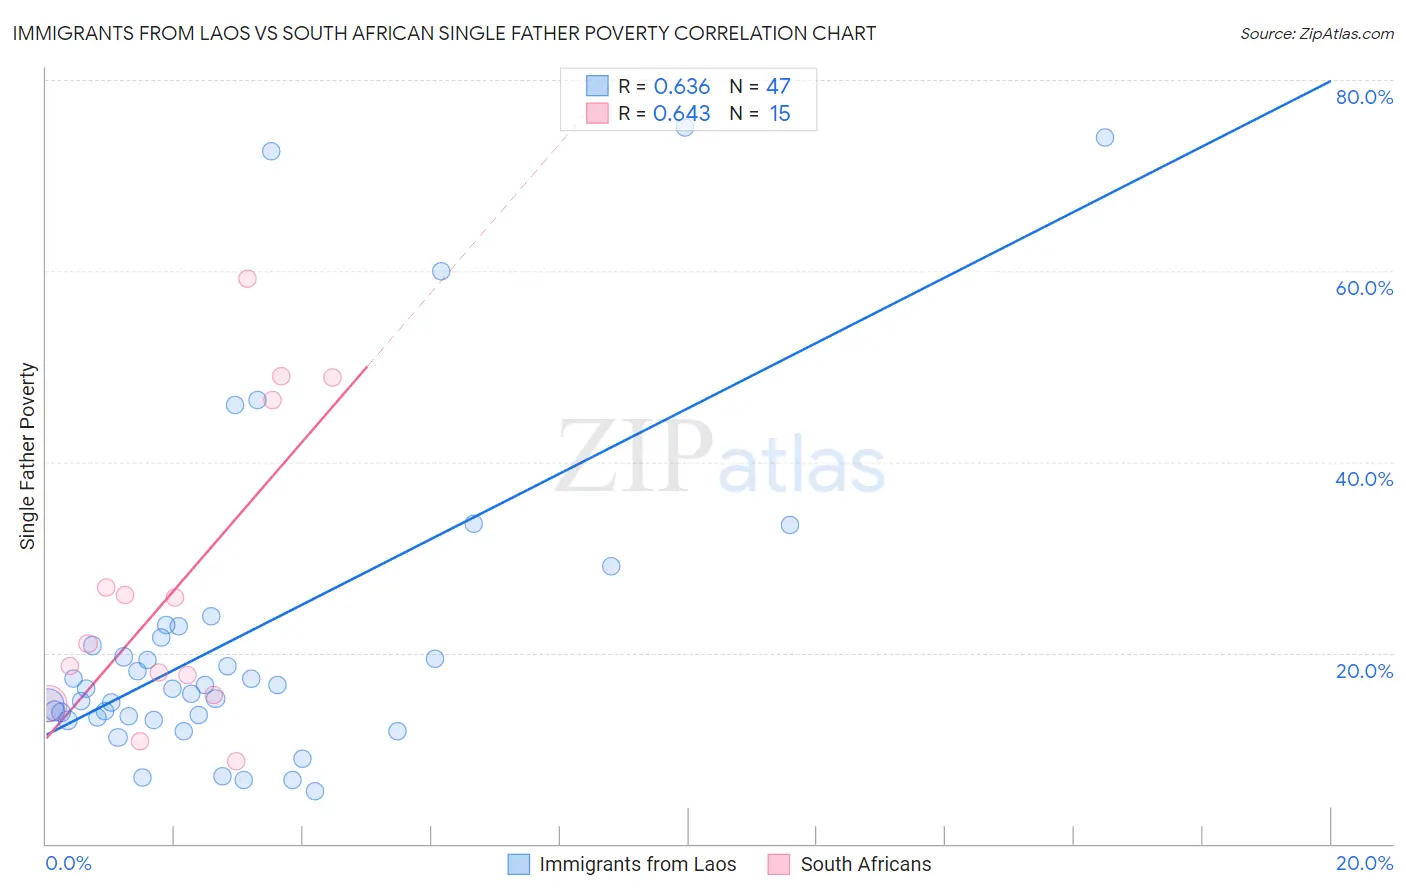 Immigrants from Laos vs South African Single Father Poverty